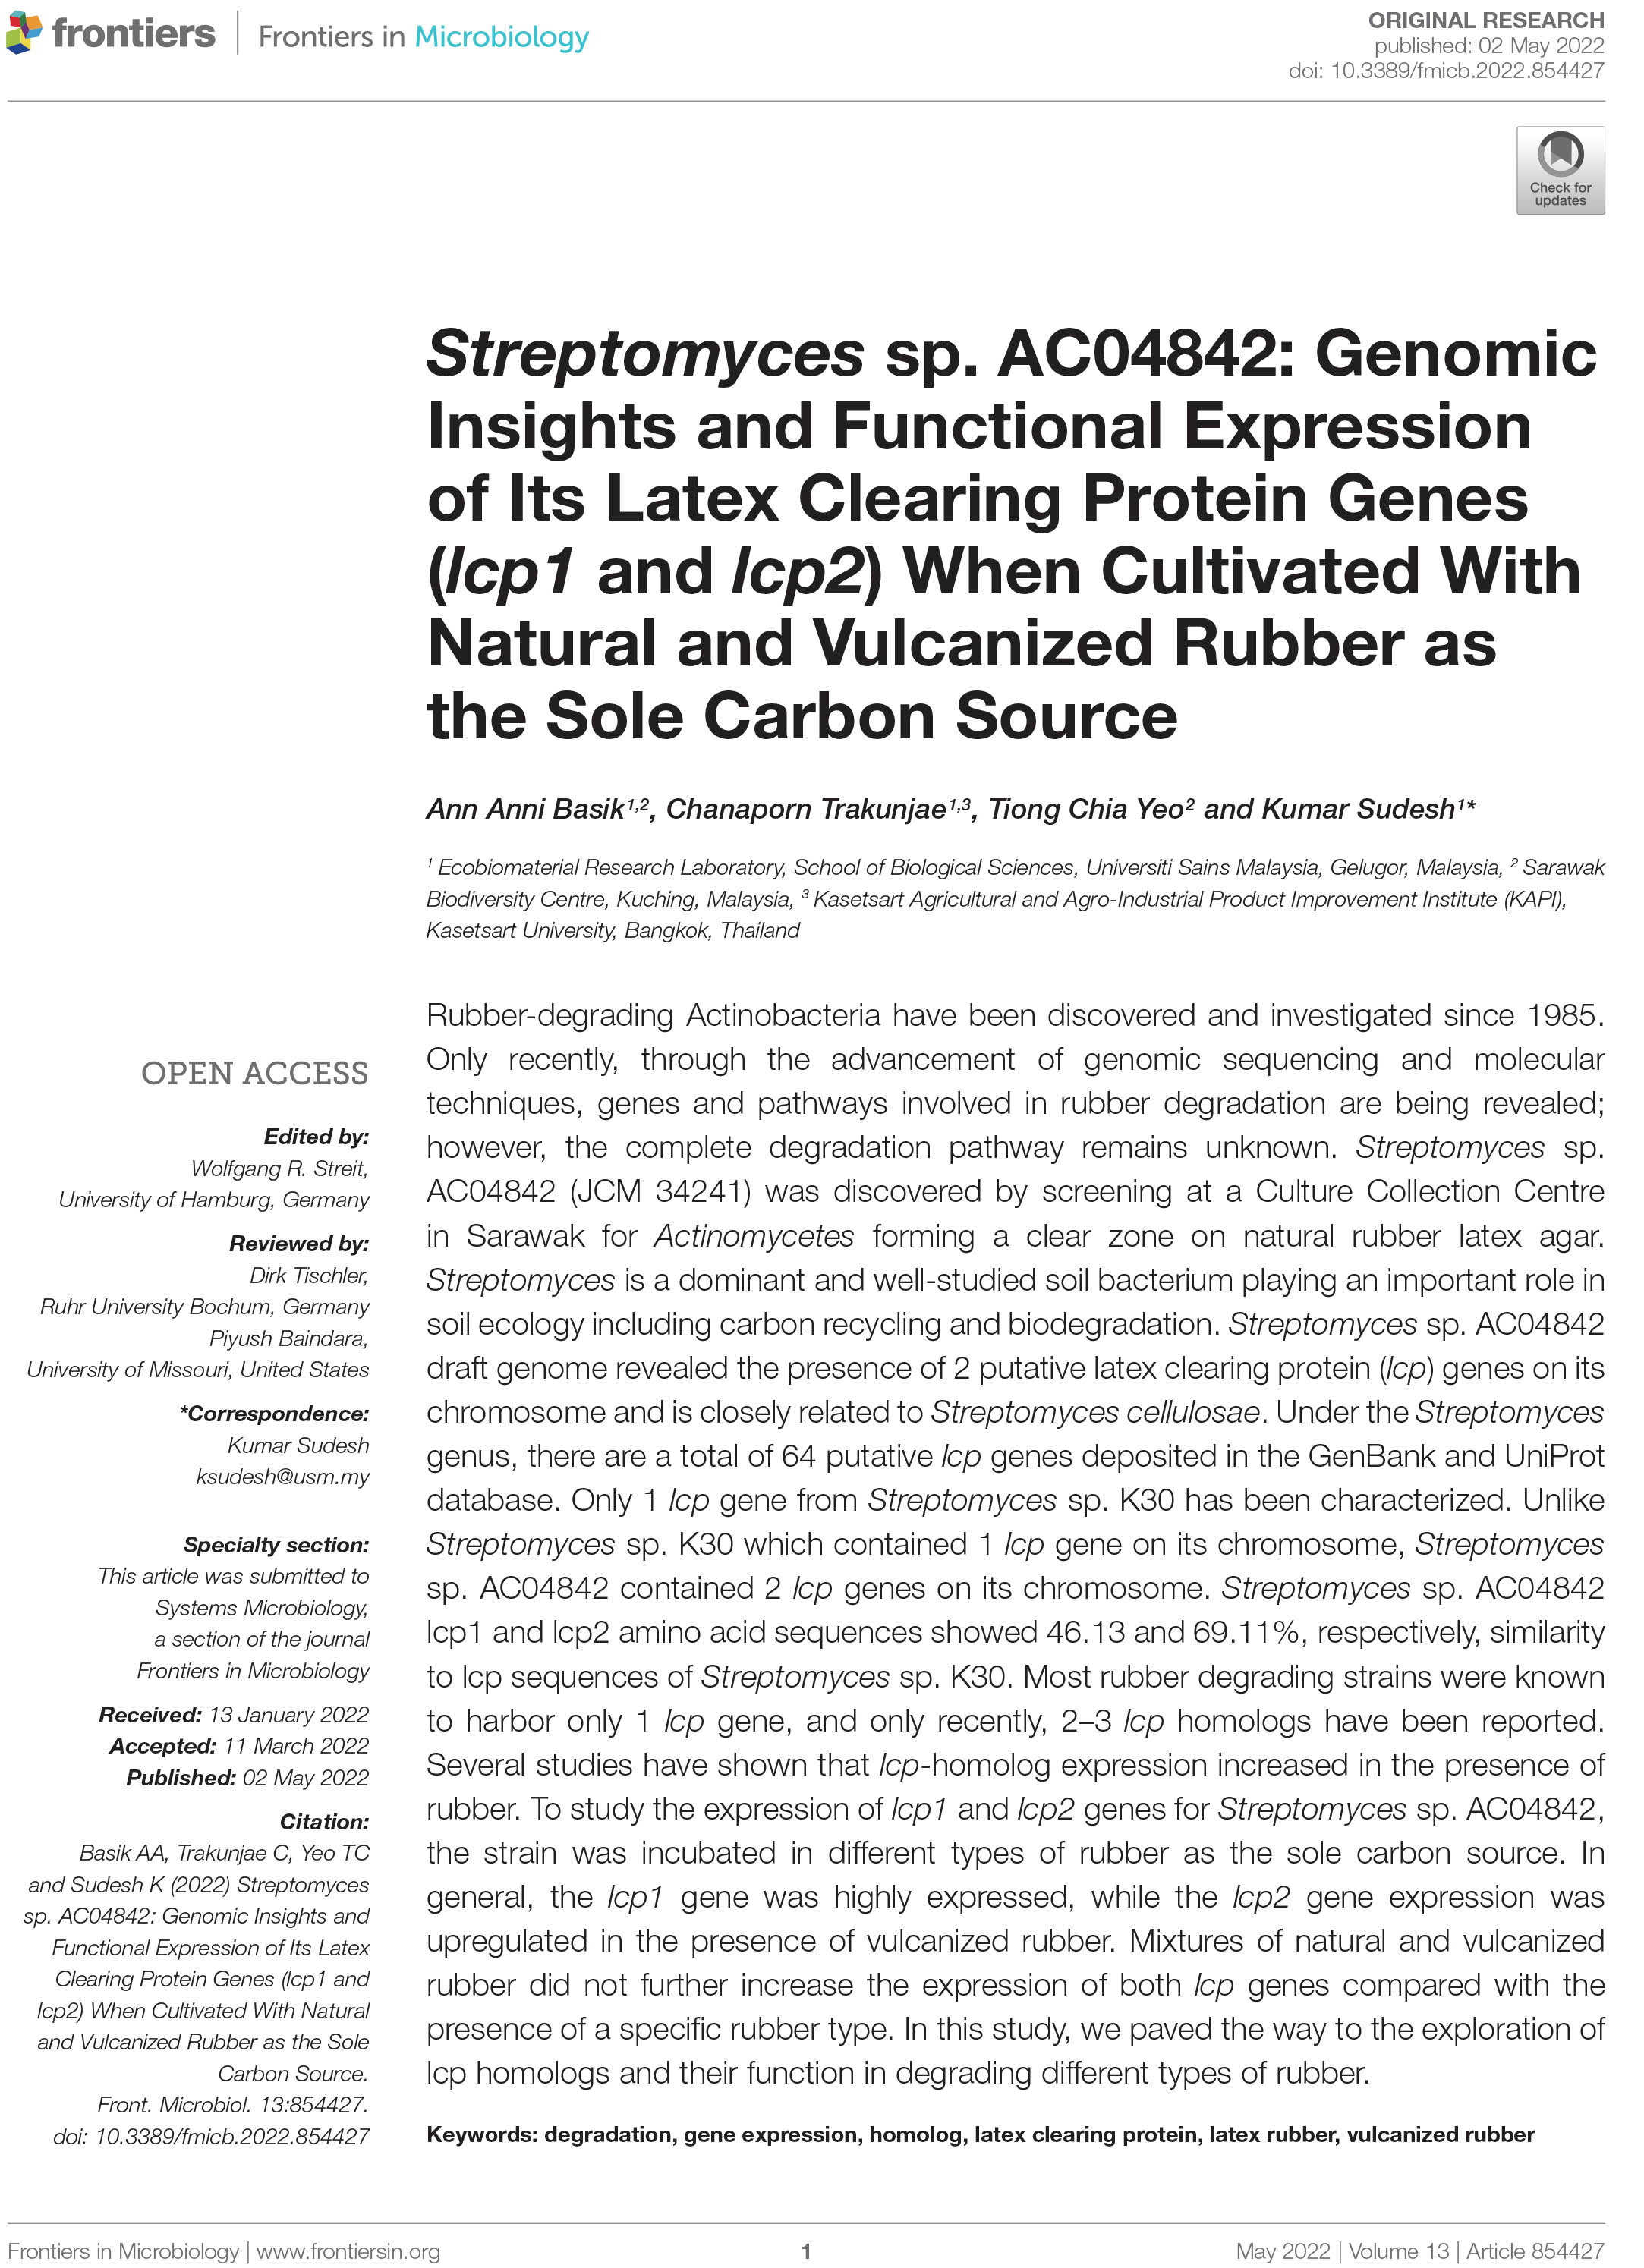 Streptomyces sp. AC04842: Genomic Insights and Functional Expression of Its Latex Clearing Protein Genes (lcp1 and lcp2) When Cultivated With Natural and Vulcanized Rubber as the Sole Carbon Source